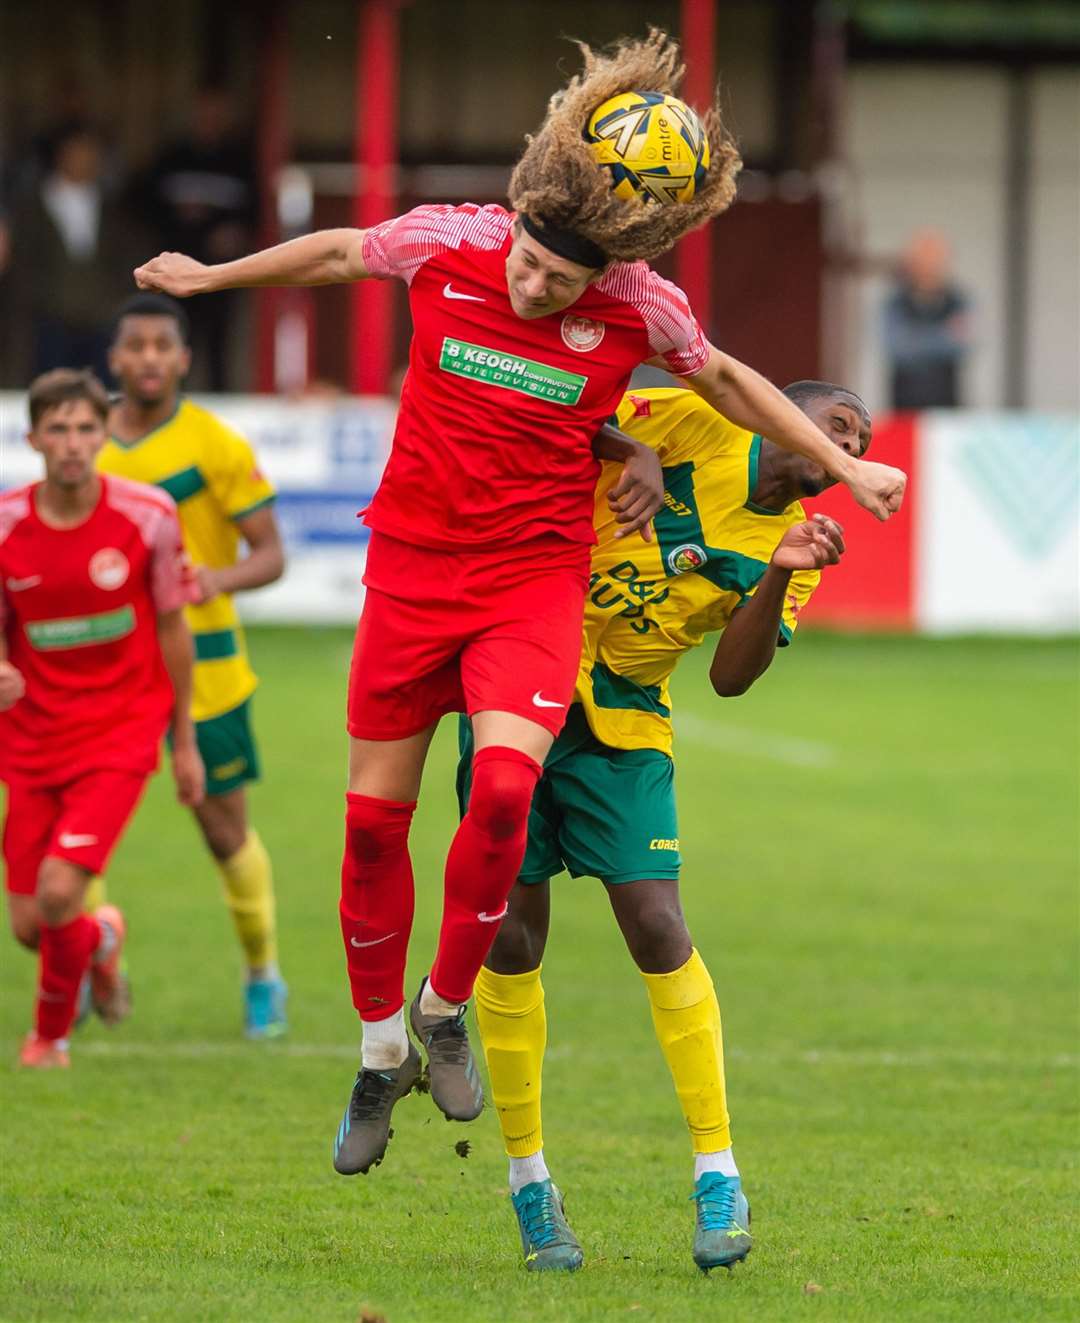 Jarred Trespaderne was back in Hythe colours last weekend. Picture: Ian Scammell